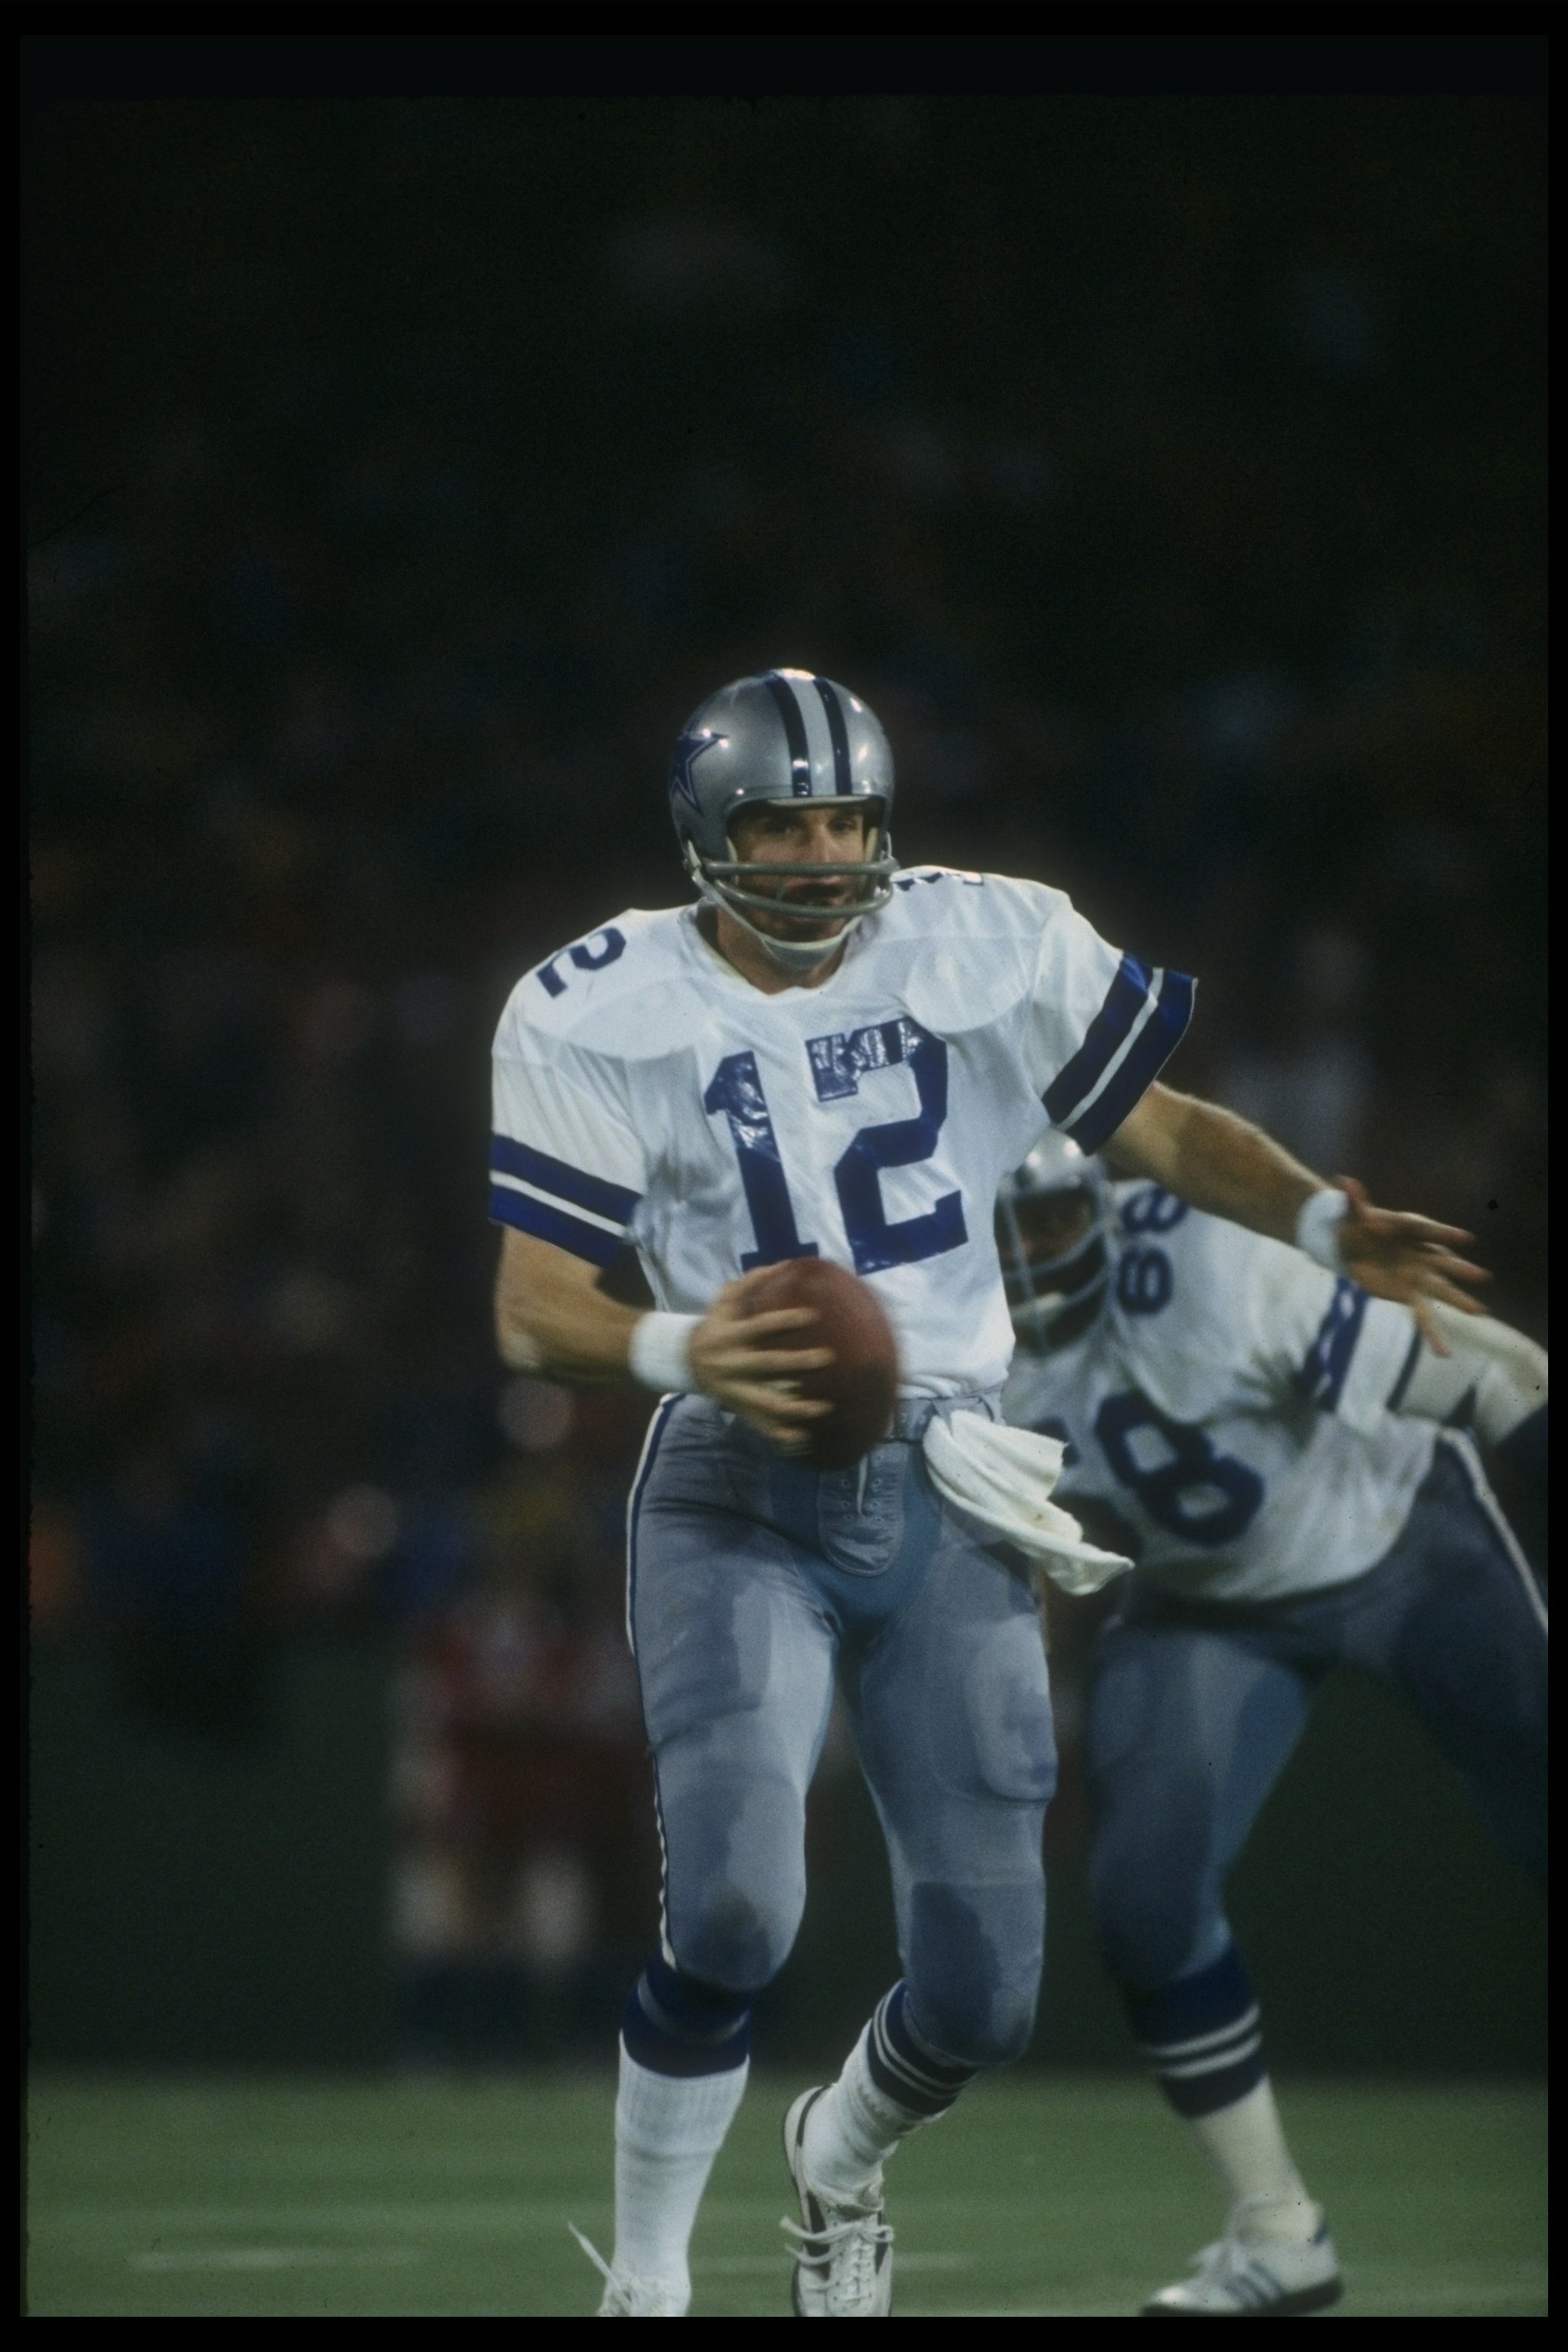 1978:  Quarterback Roger Staubach of the Dallas Cowboys looks to pass the ball during a game. Mandatory Credit: Allsport  /Allsport